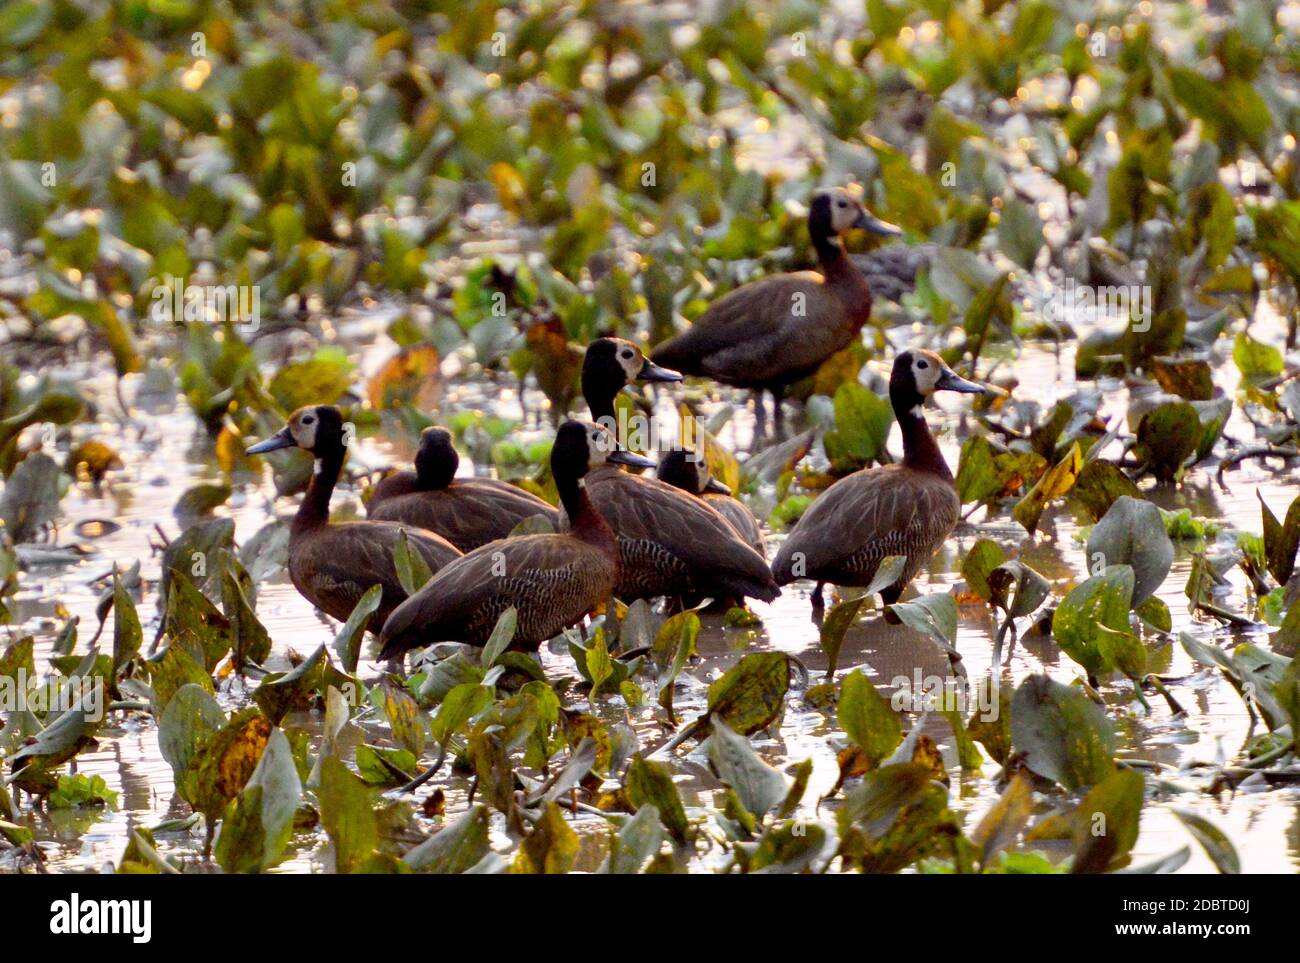 Widow Whistling Goose in Gorongosa National Park in Mozambique,widow duck Stock Photo